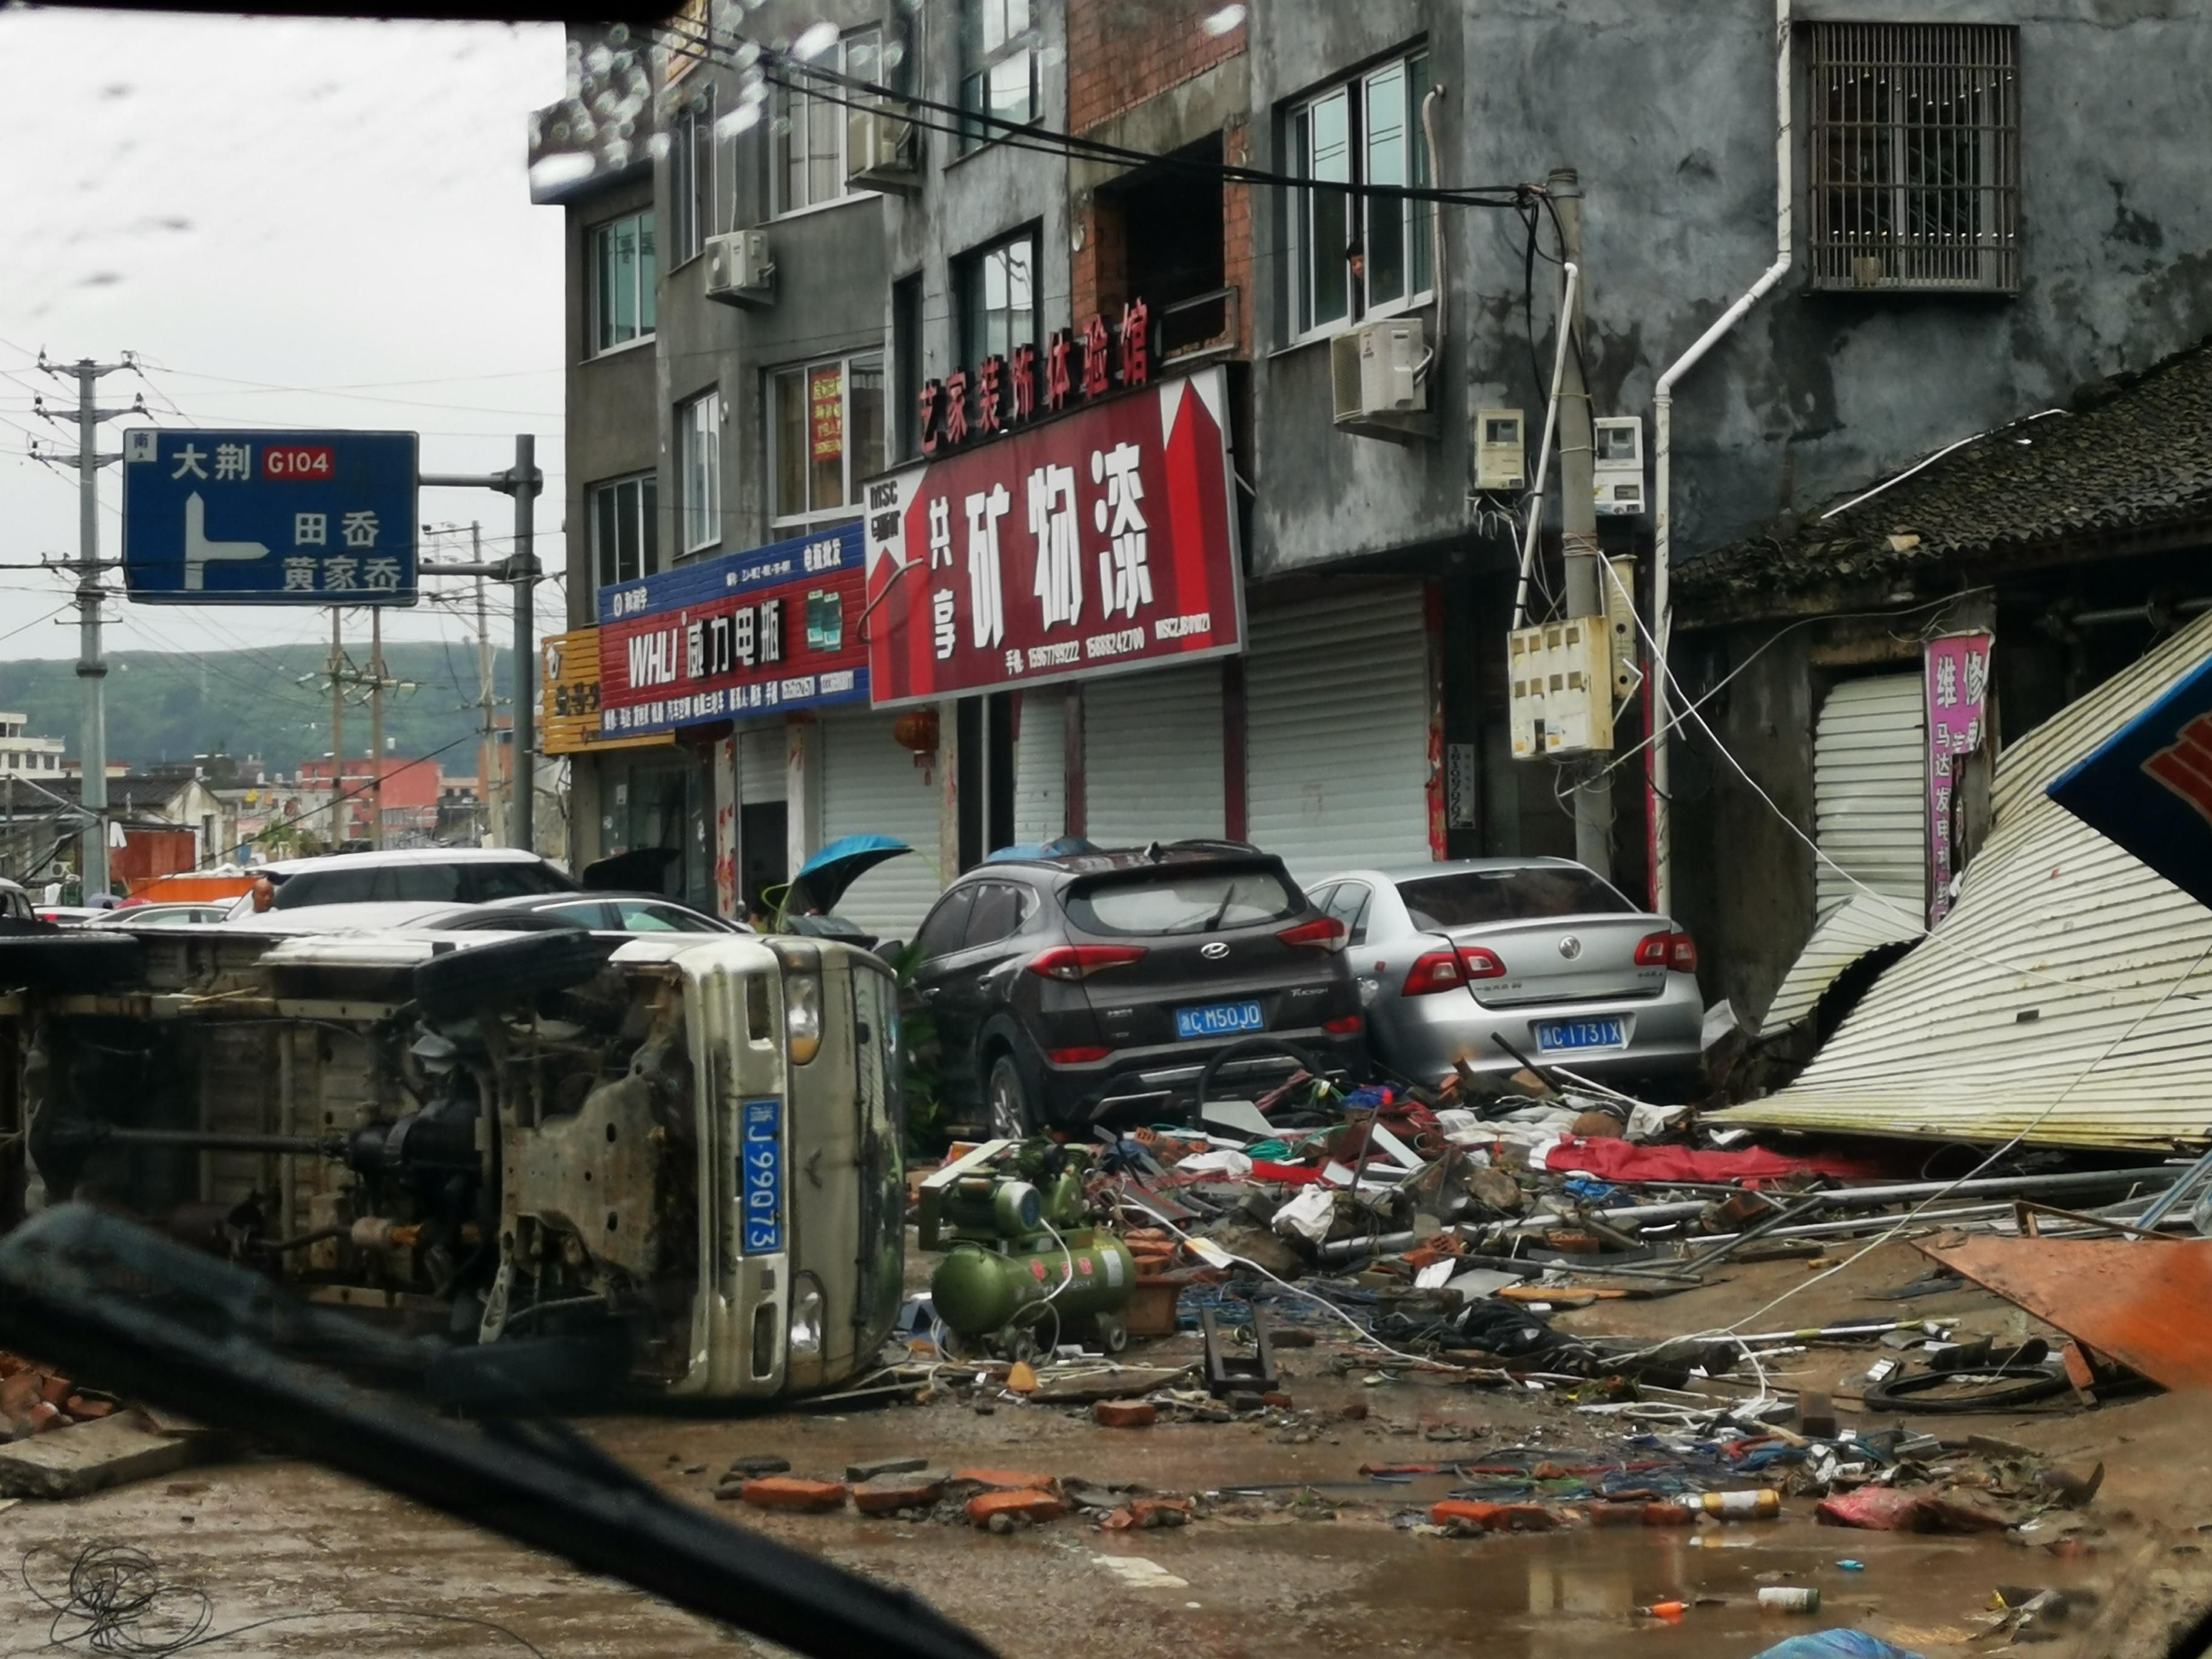  Damaged vehicles are seen in the street on August 10, 2019 in Yueqing, Zhejiang Province of China.